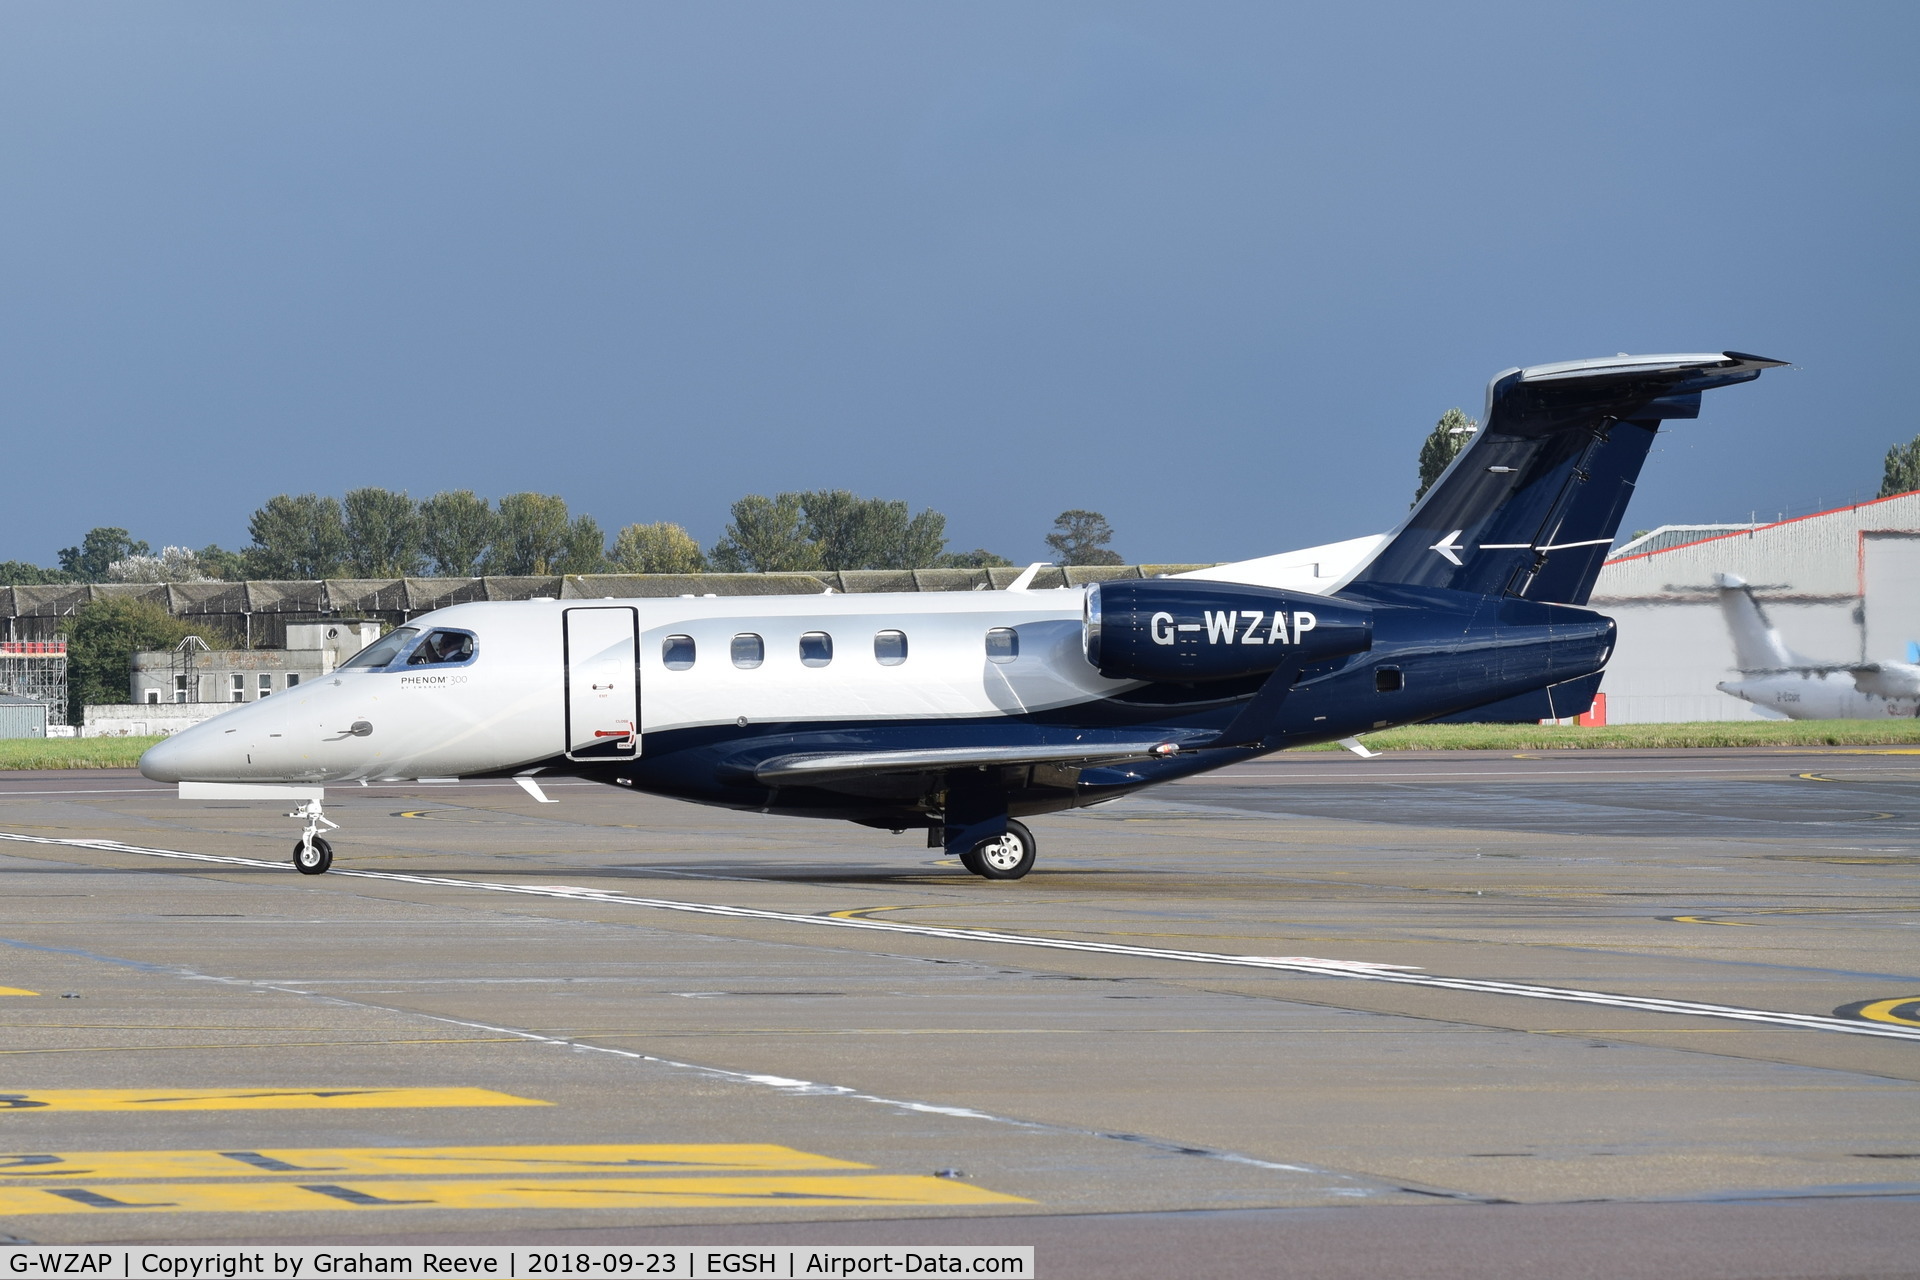 G-WZAP, 2017 Embraer EMB-505 Phenom 300 C/N 50500438, Departing from Norwich.